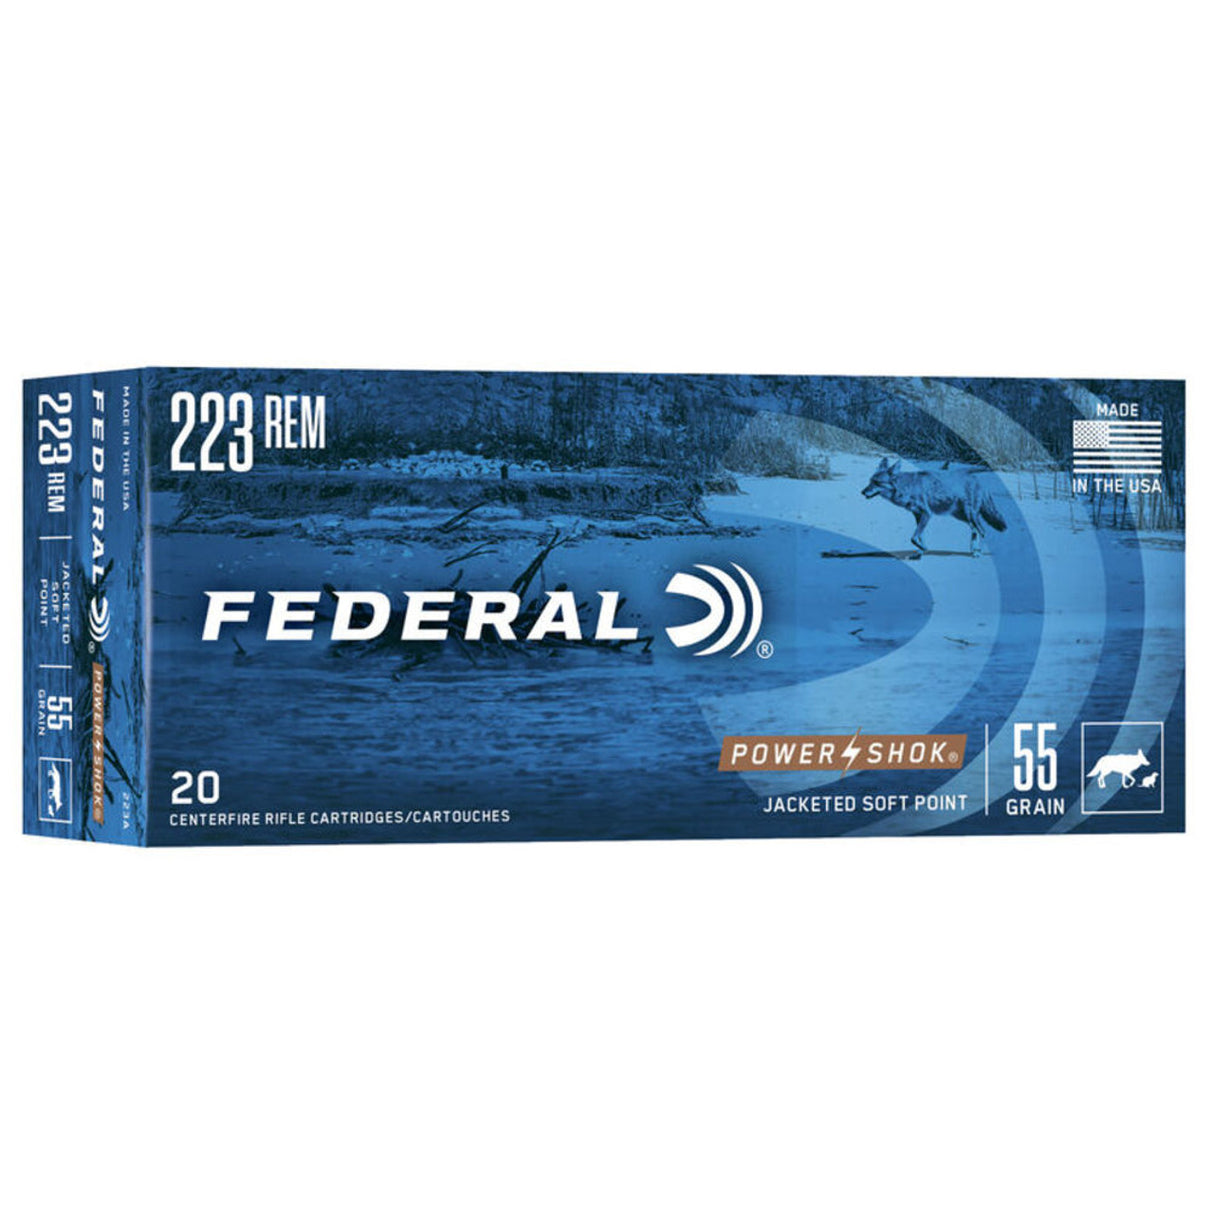 FEDERAL POWER-SHOK 223 REMINGTON AMMO 55GR, SOFT POINT, BOX OF 20 ROUNDS